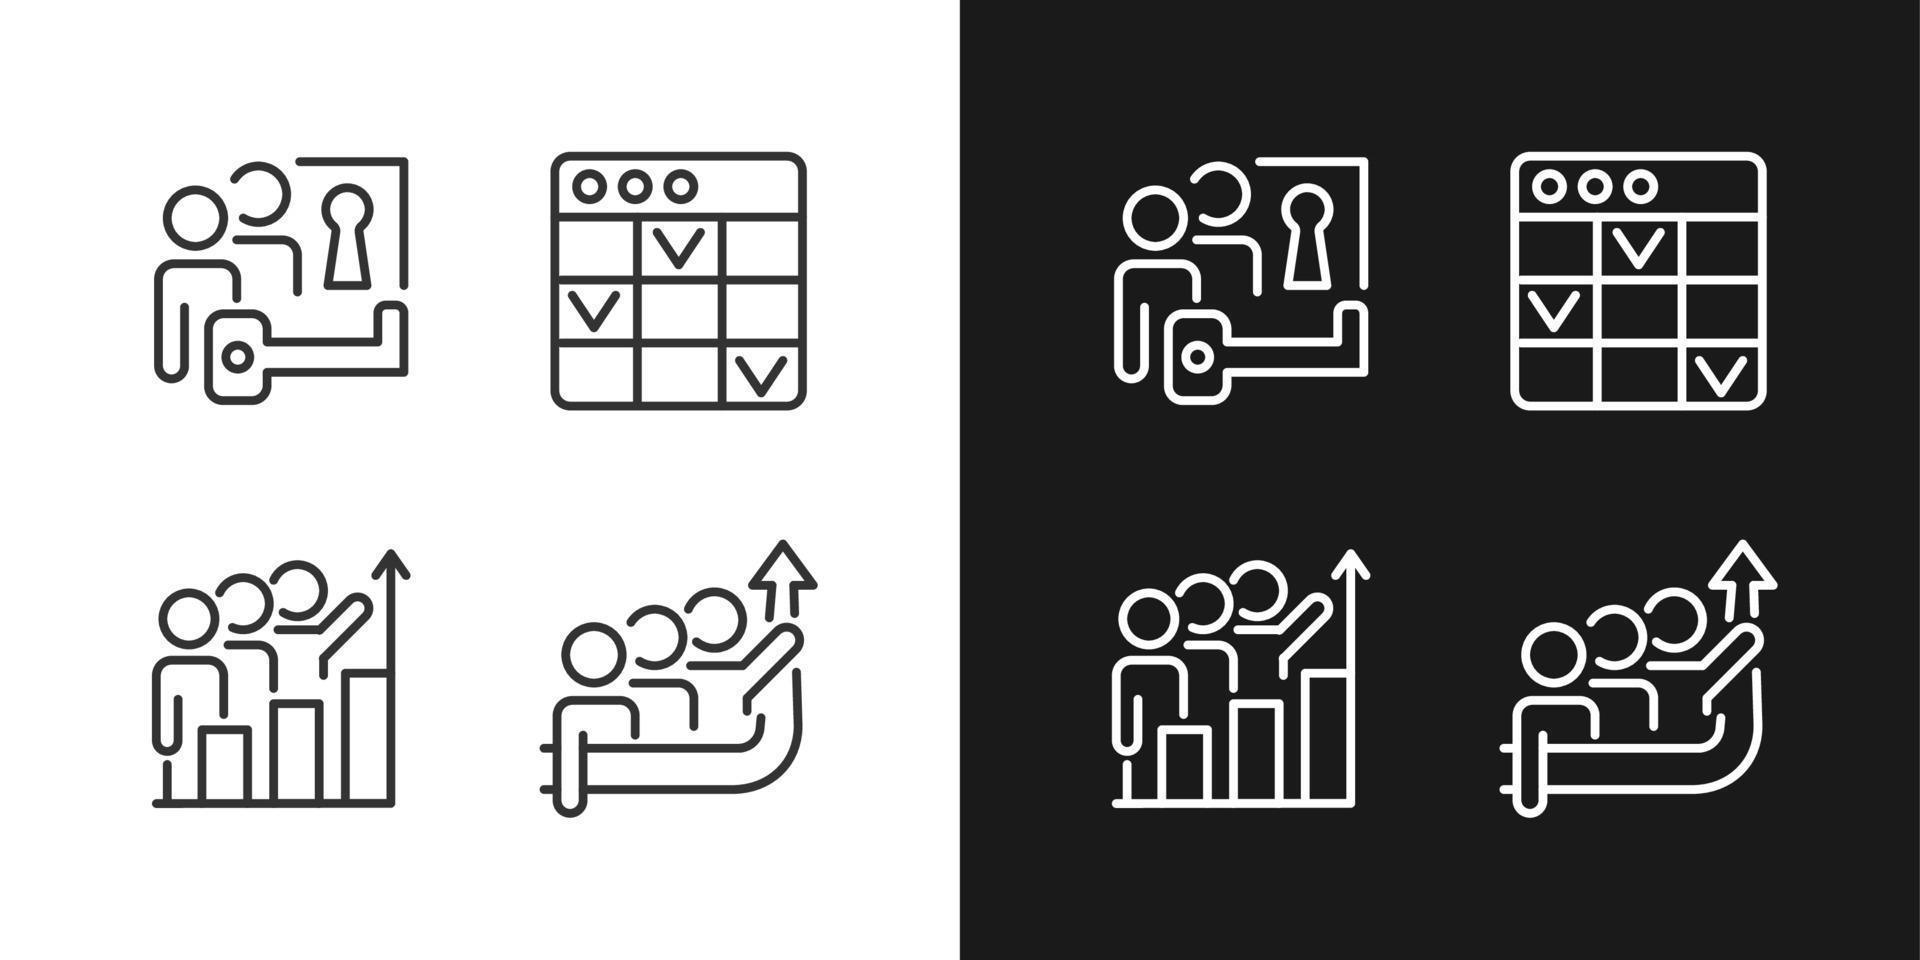 Team project pixel perfect linear icons set for dark, light mode. Problem solving. Task management. Common goal. Thin line symbols for night, day theme. Isolated illustrations. Editable stroke vector